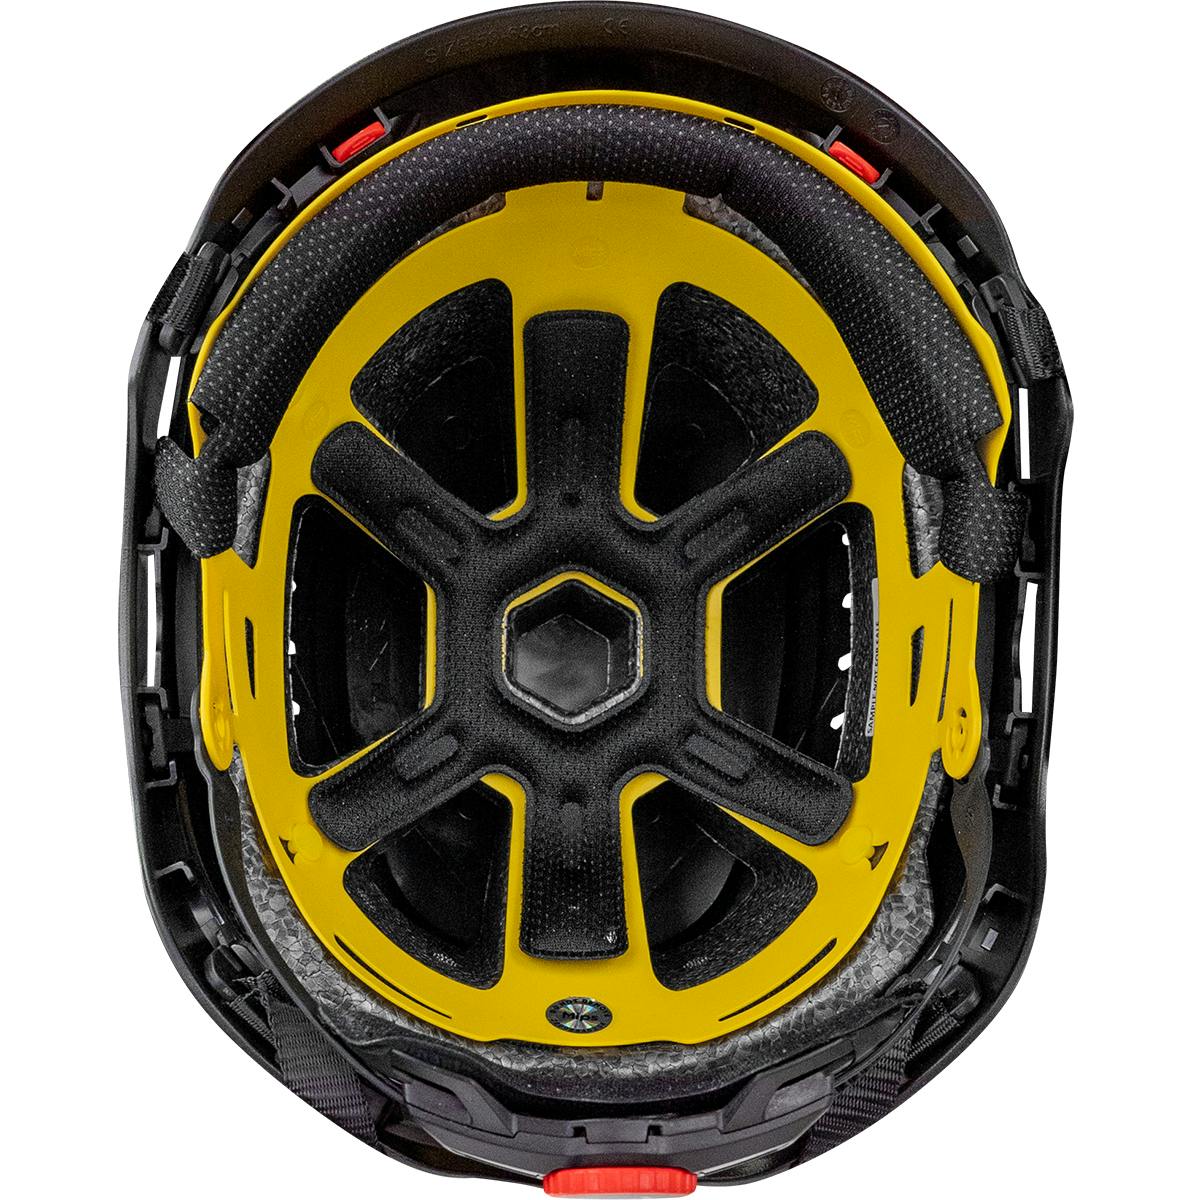 Traverse™ Vented, Industrial Climbing Helmet with Mips® Technology, ABS Shell, EPS Foam Impact Liner, HDPE Suspension, Wheel Ratchet Adjustment and 4-Point Chin Strap (280-HP1491RVM)_1